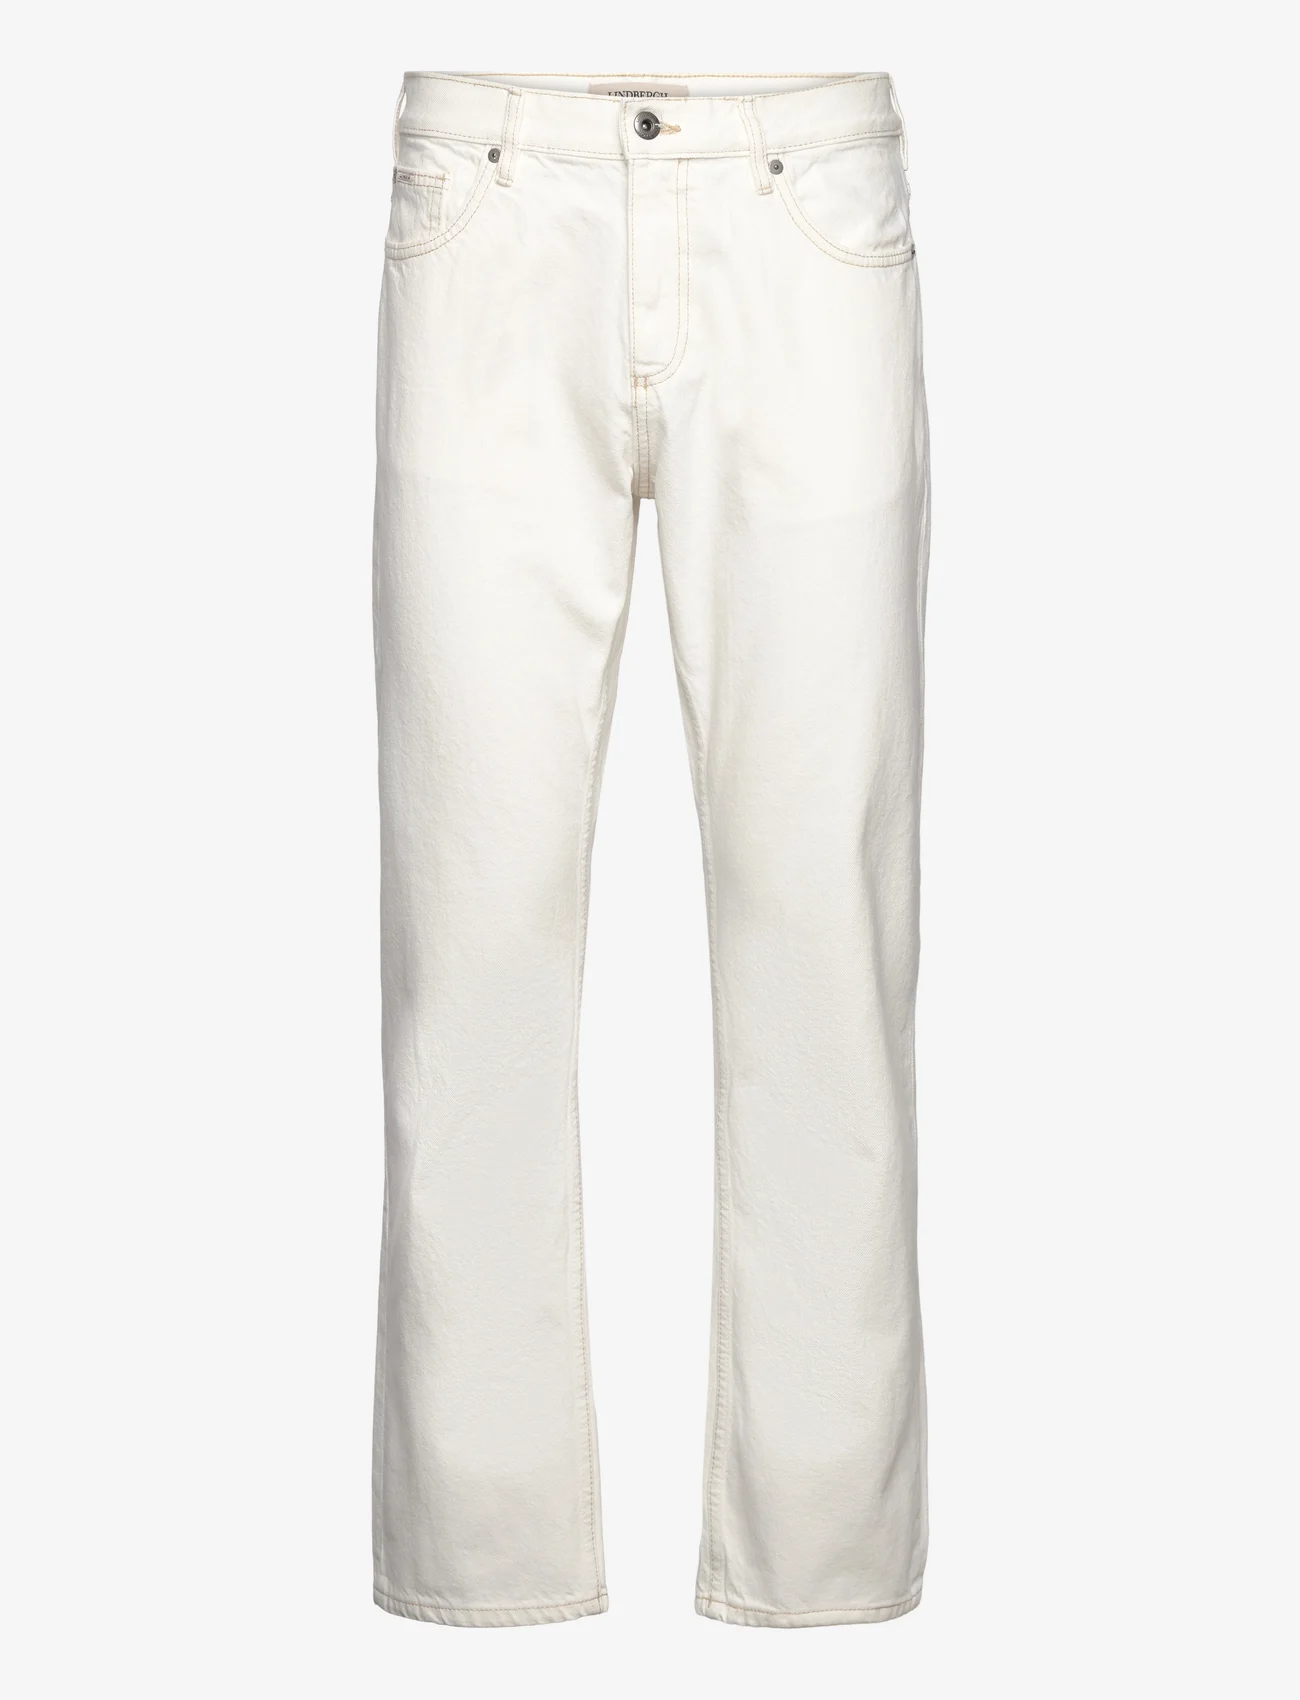 Lindbergh - Loose fit jeans - nordic style - off white - 0